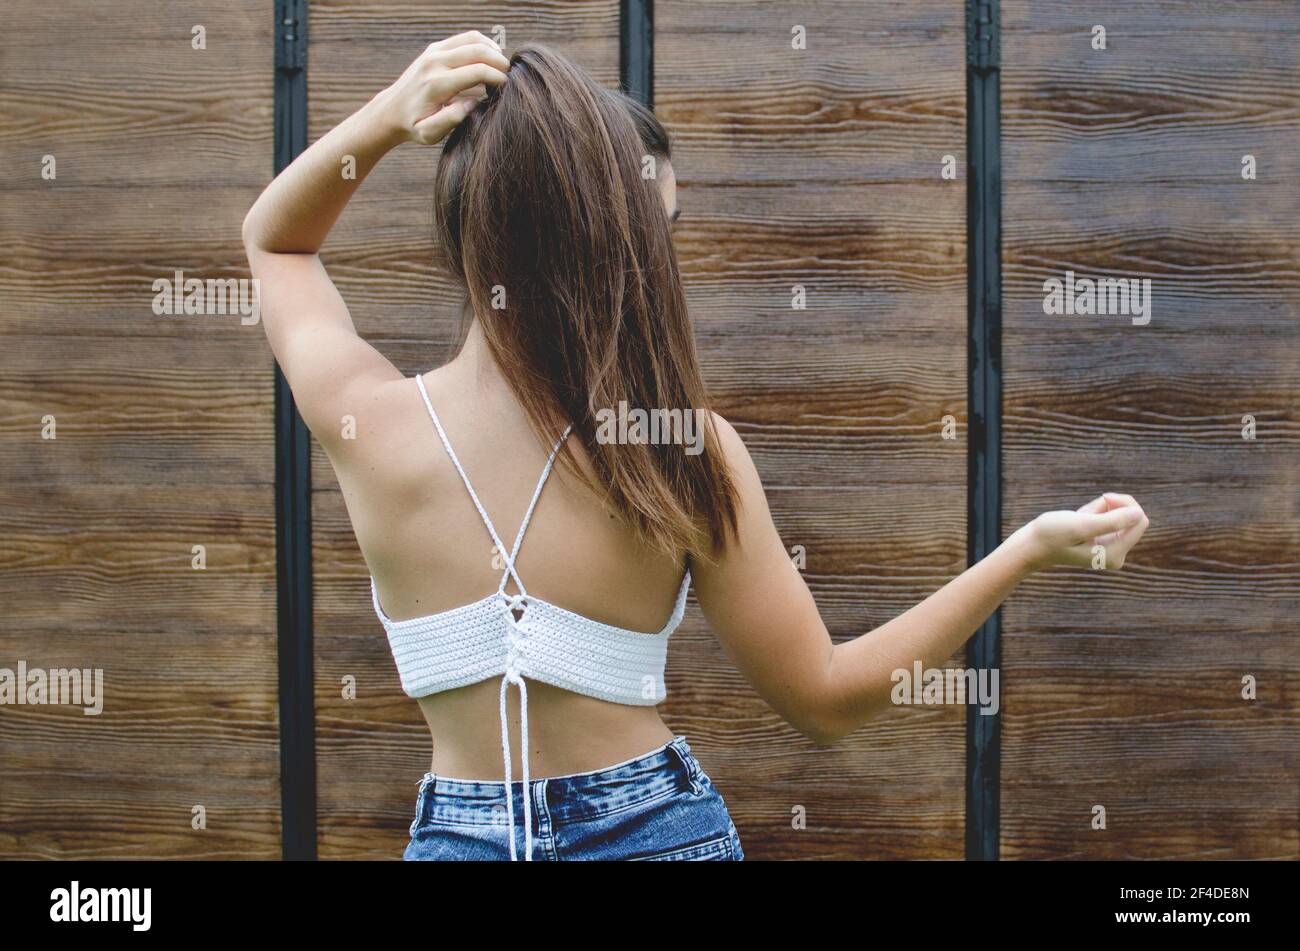 Rear view of a teenage girl standing outdoors touching her hair Stock Photo